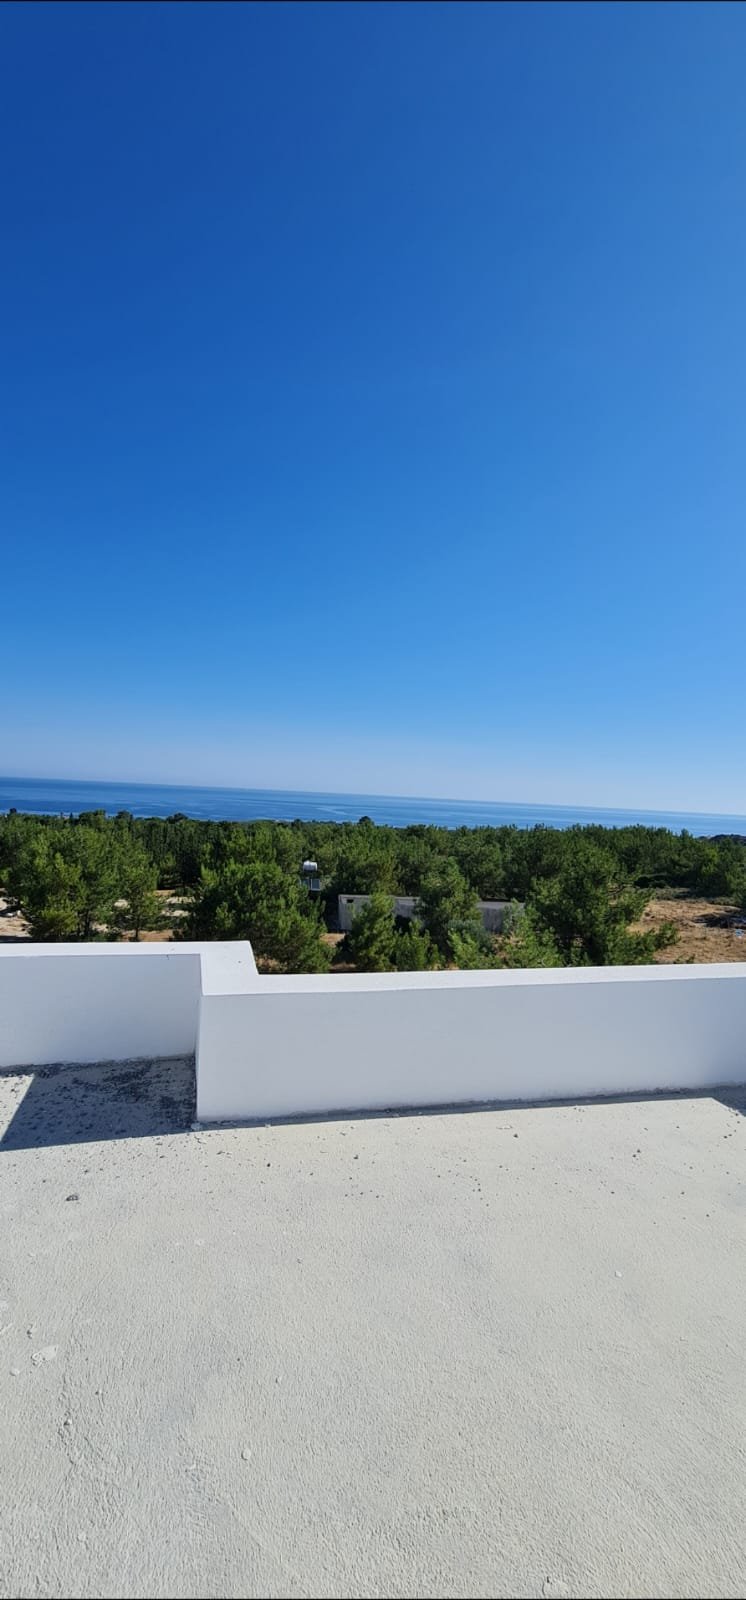 For Sale 3+1 New Villa in Catalkoy-ecf49473-5a23-4f07-bea4-654fe3915dcb